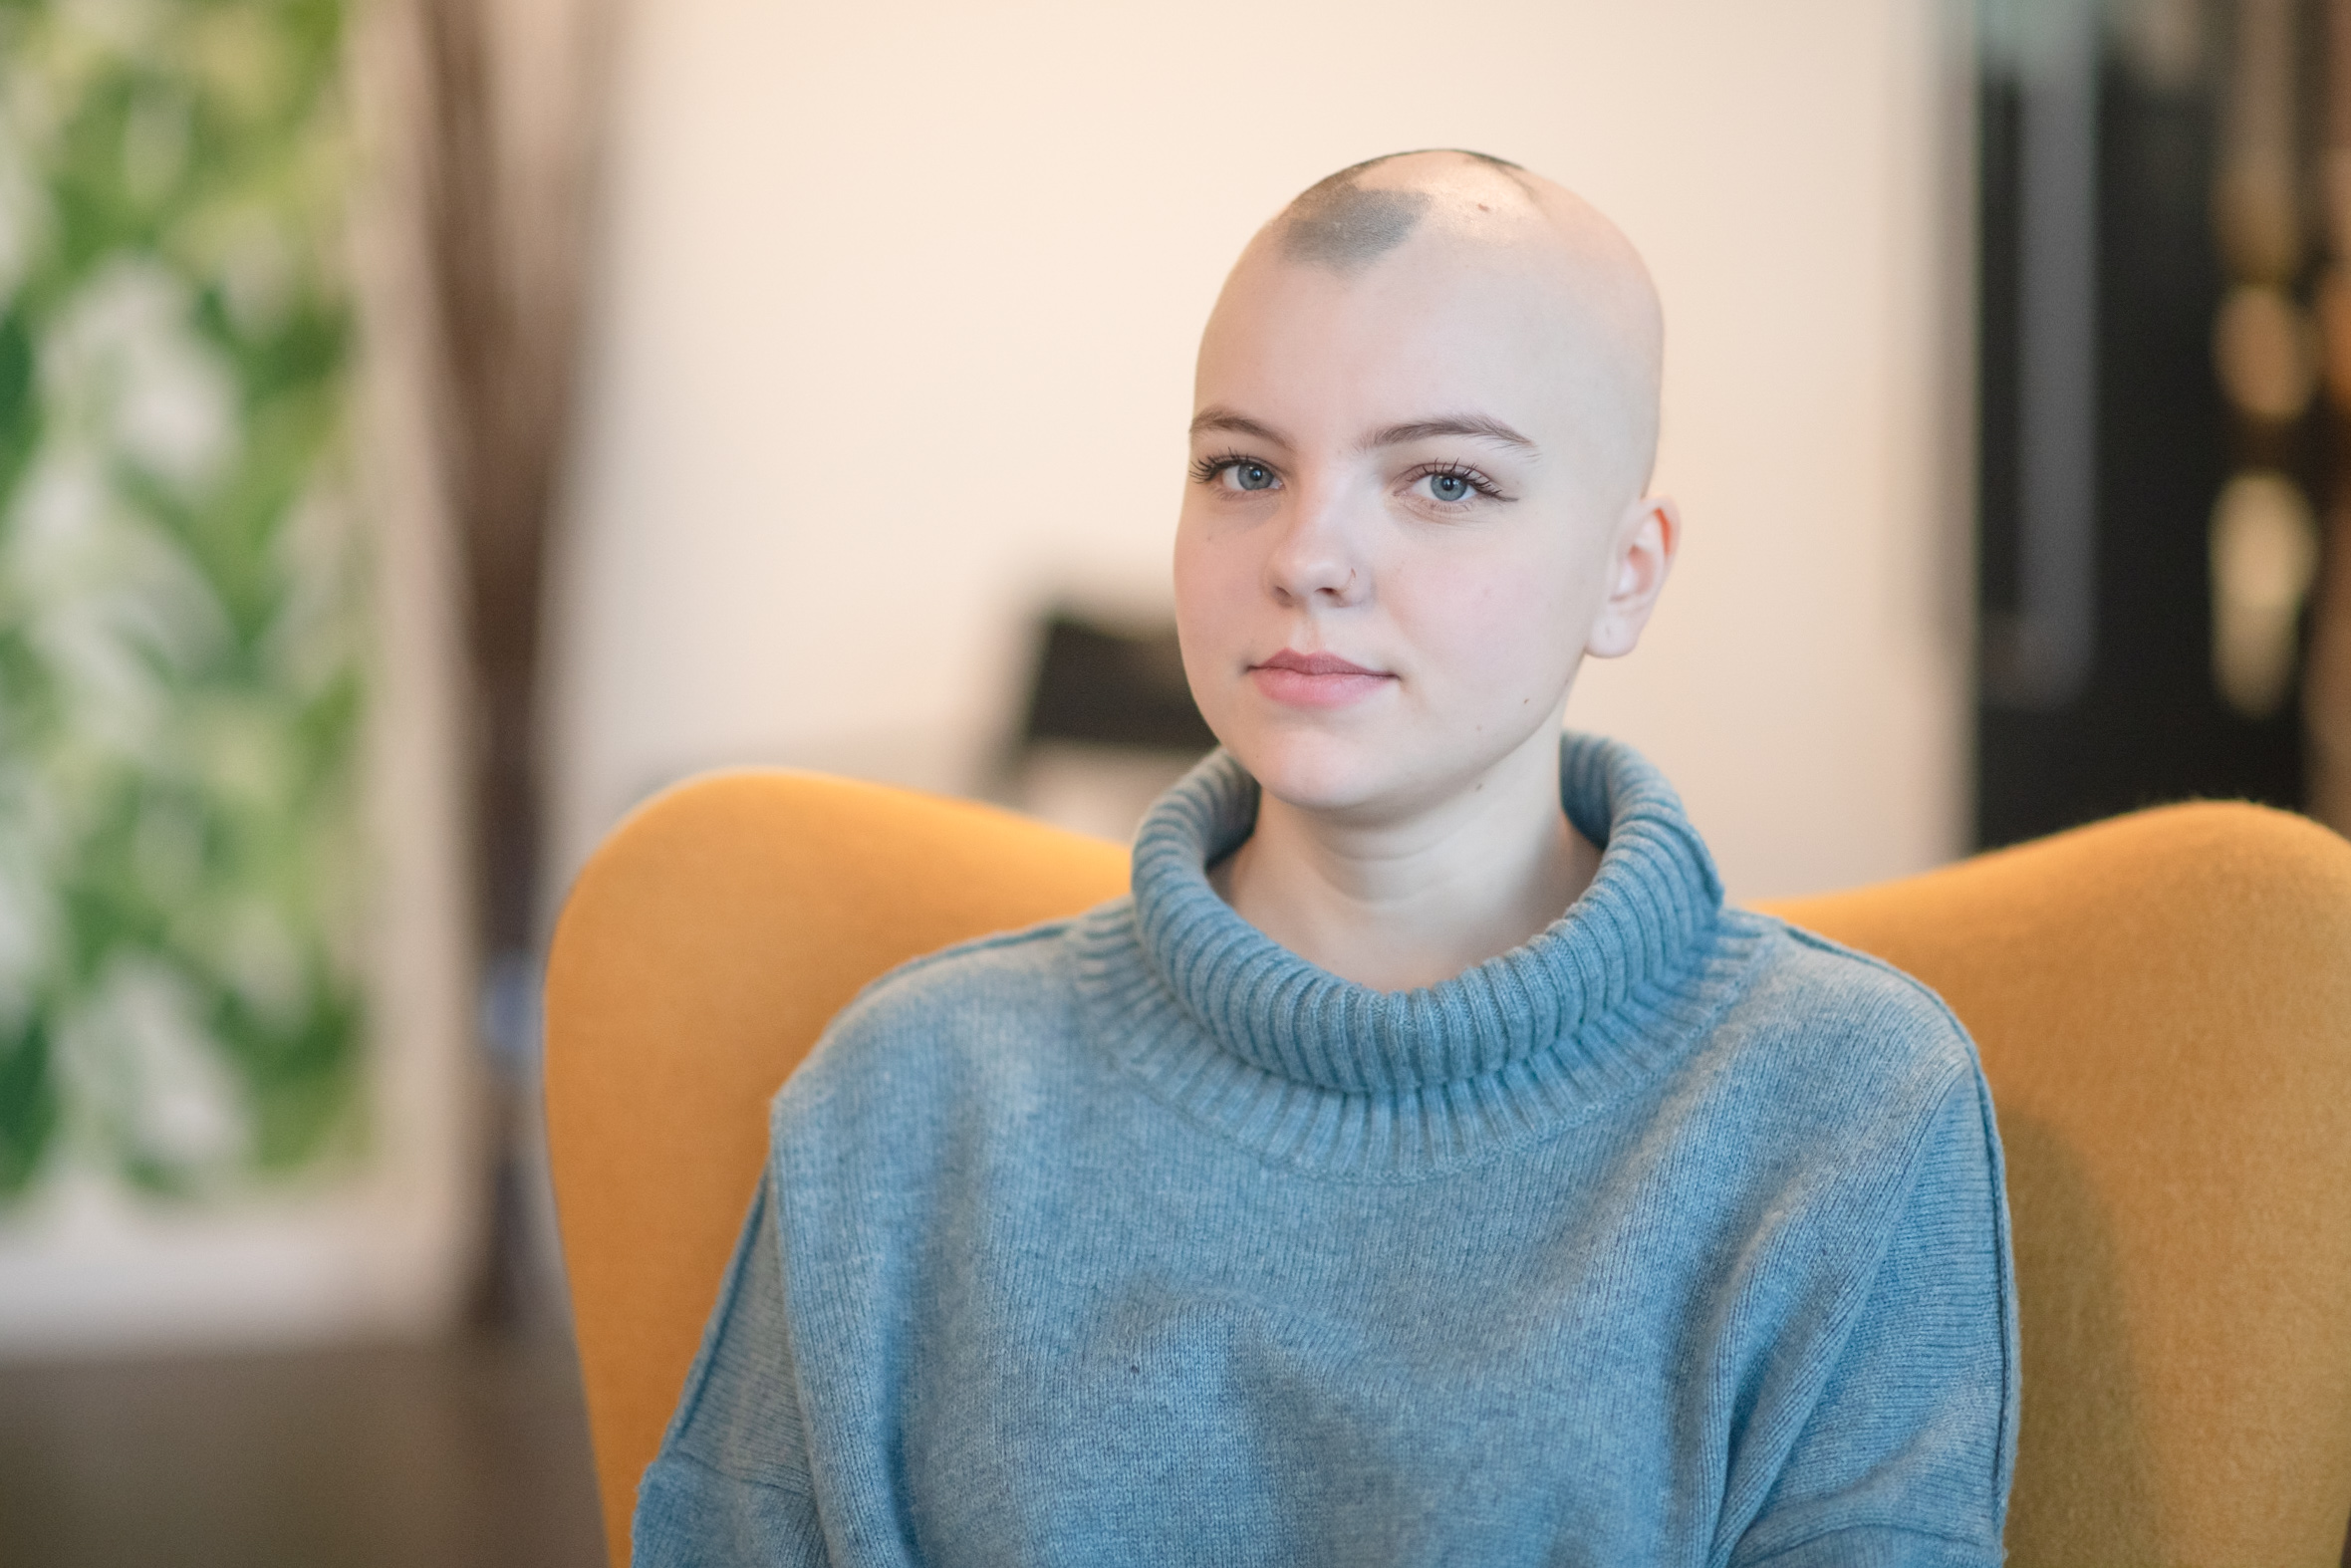 woman with alopecia